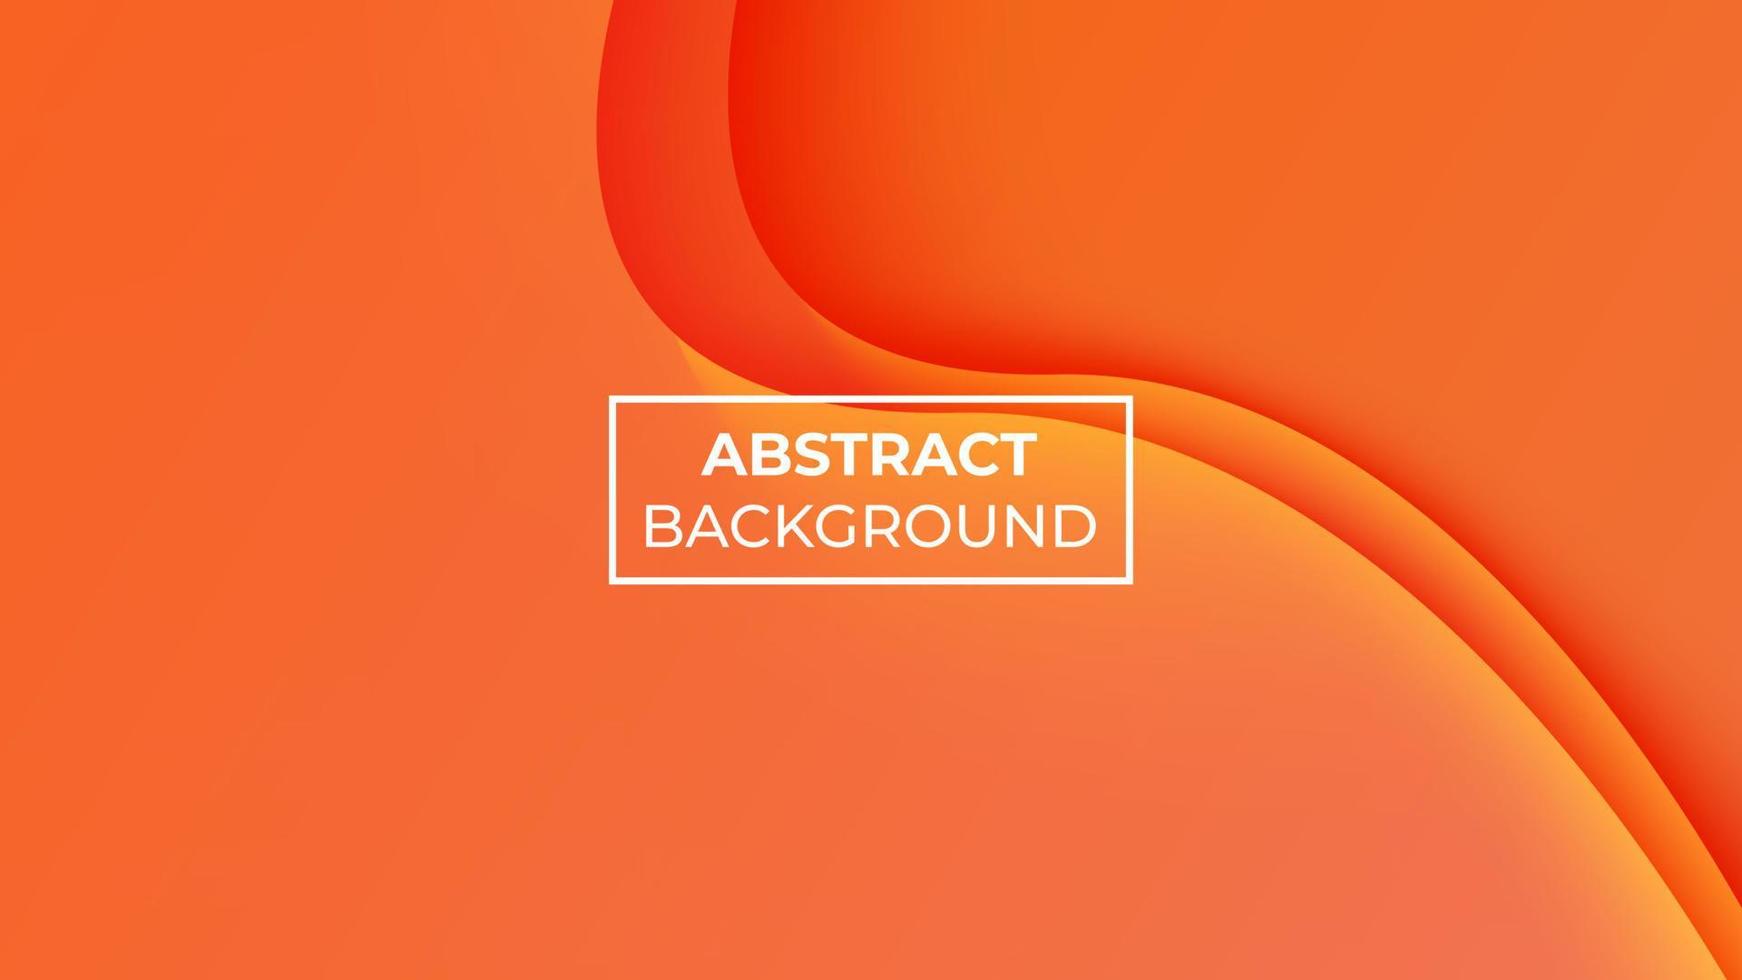 Abstract background mixture of two light and dark orange colors with overlapping curves, easy to edit vector